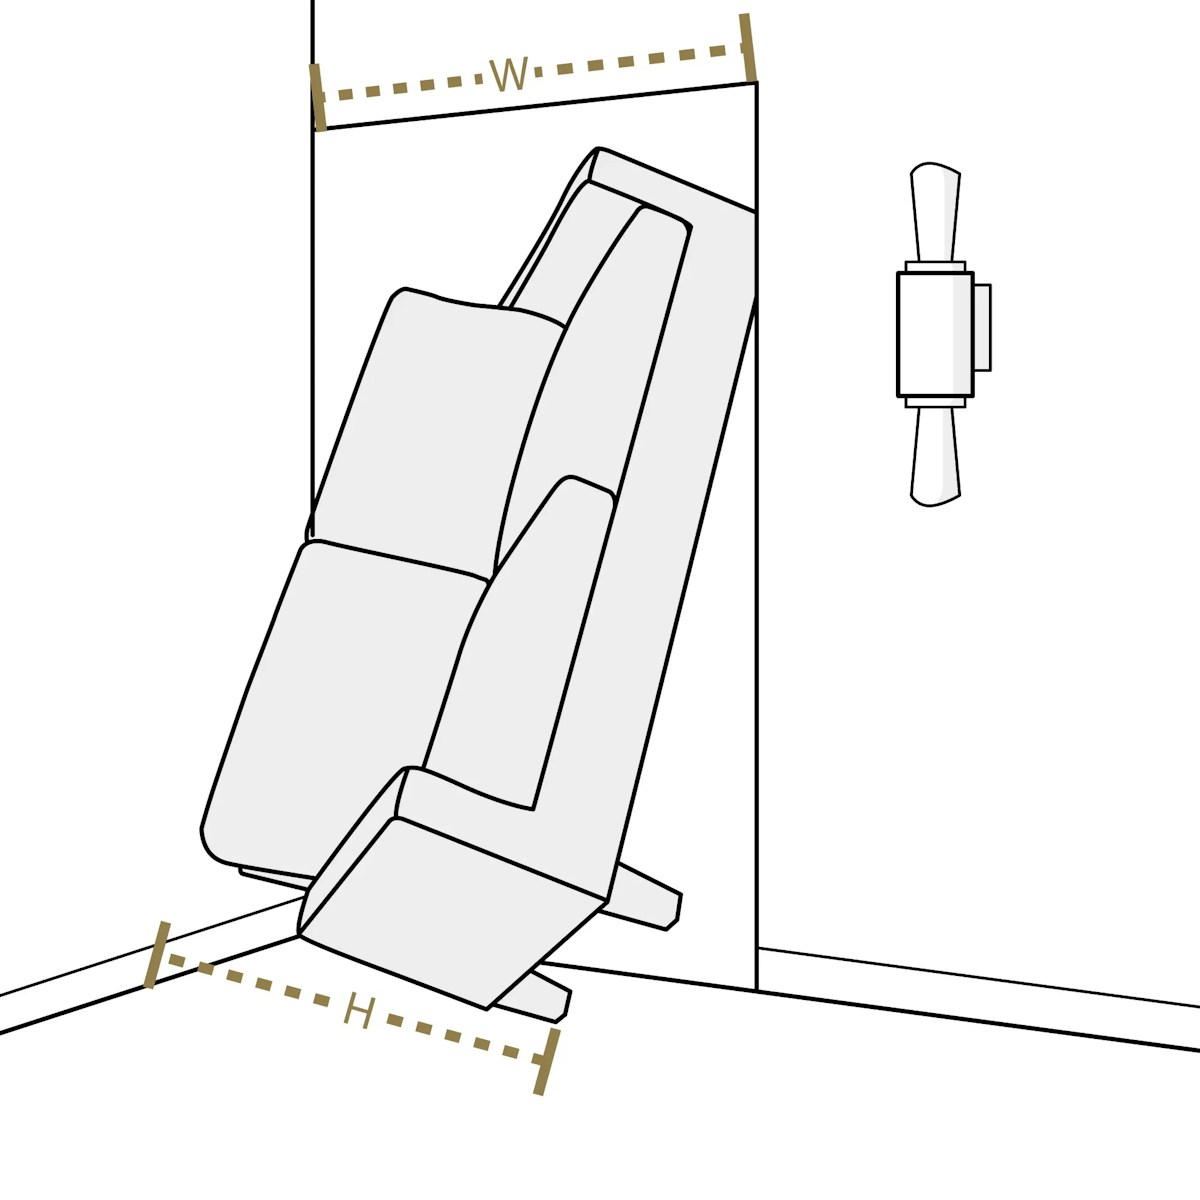 An illustration demonstrating getting a sofa safely through a door